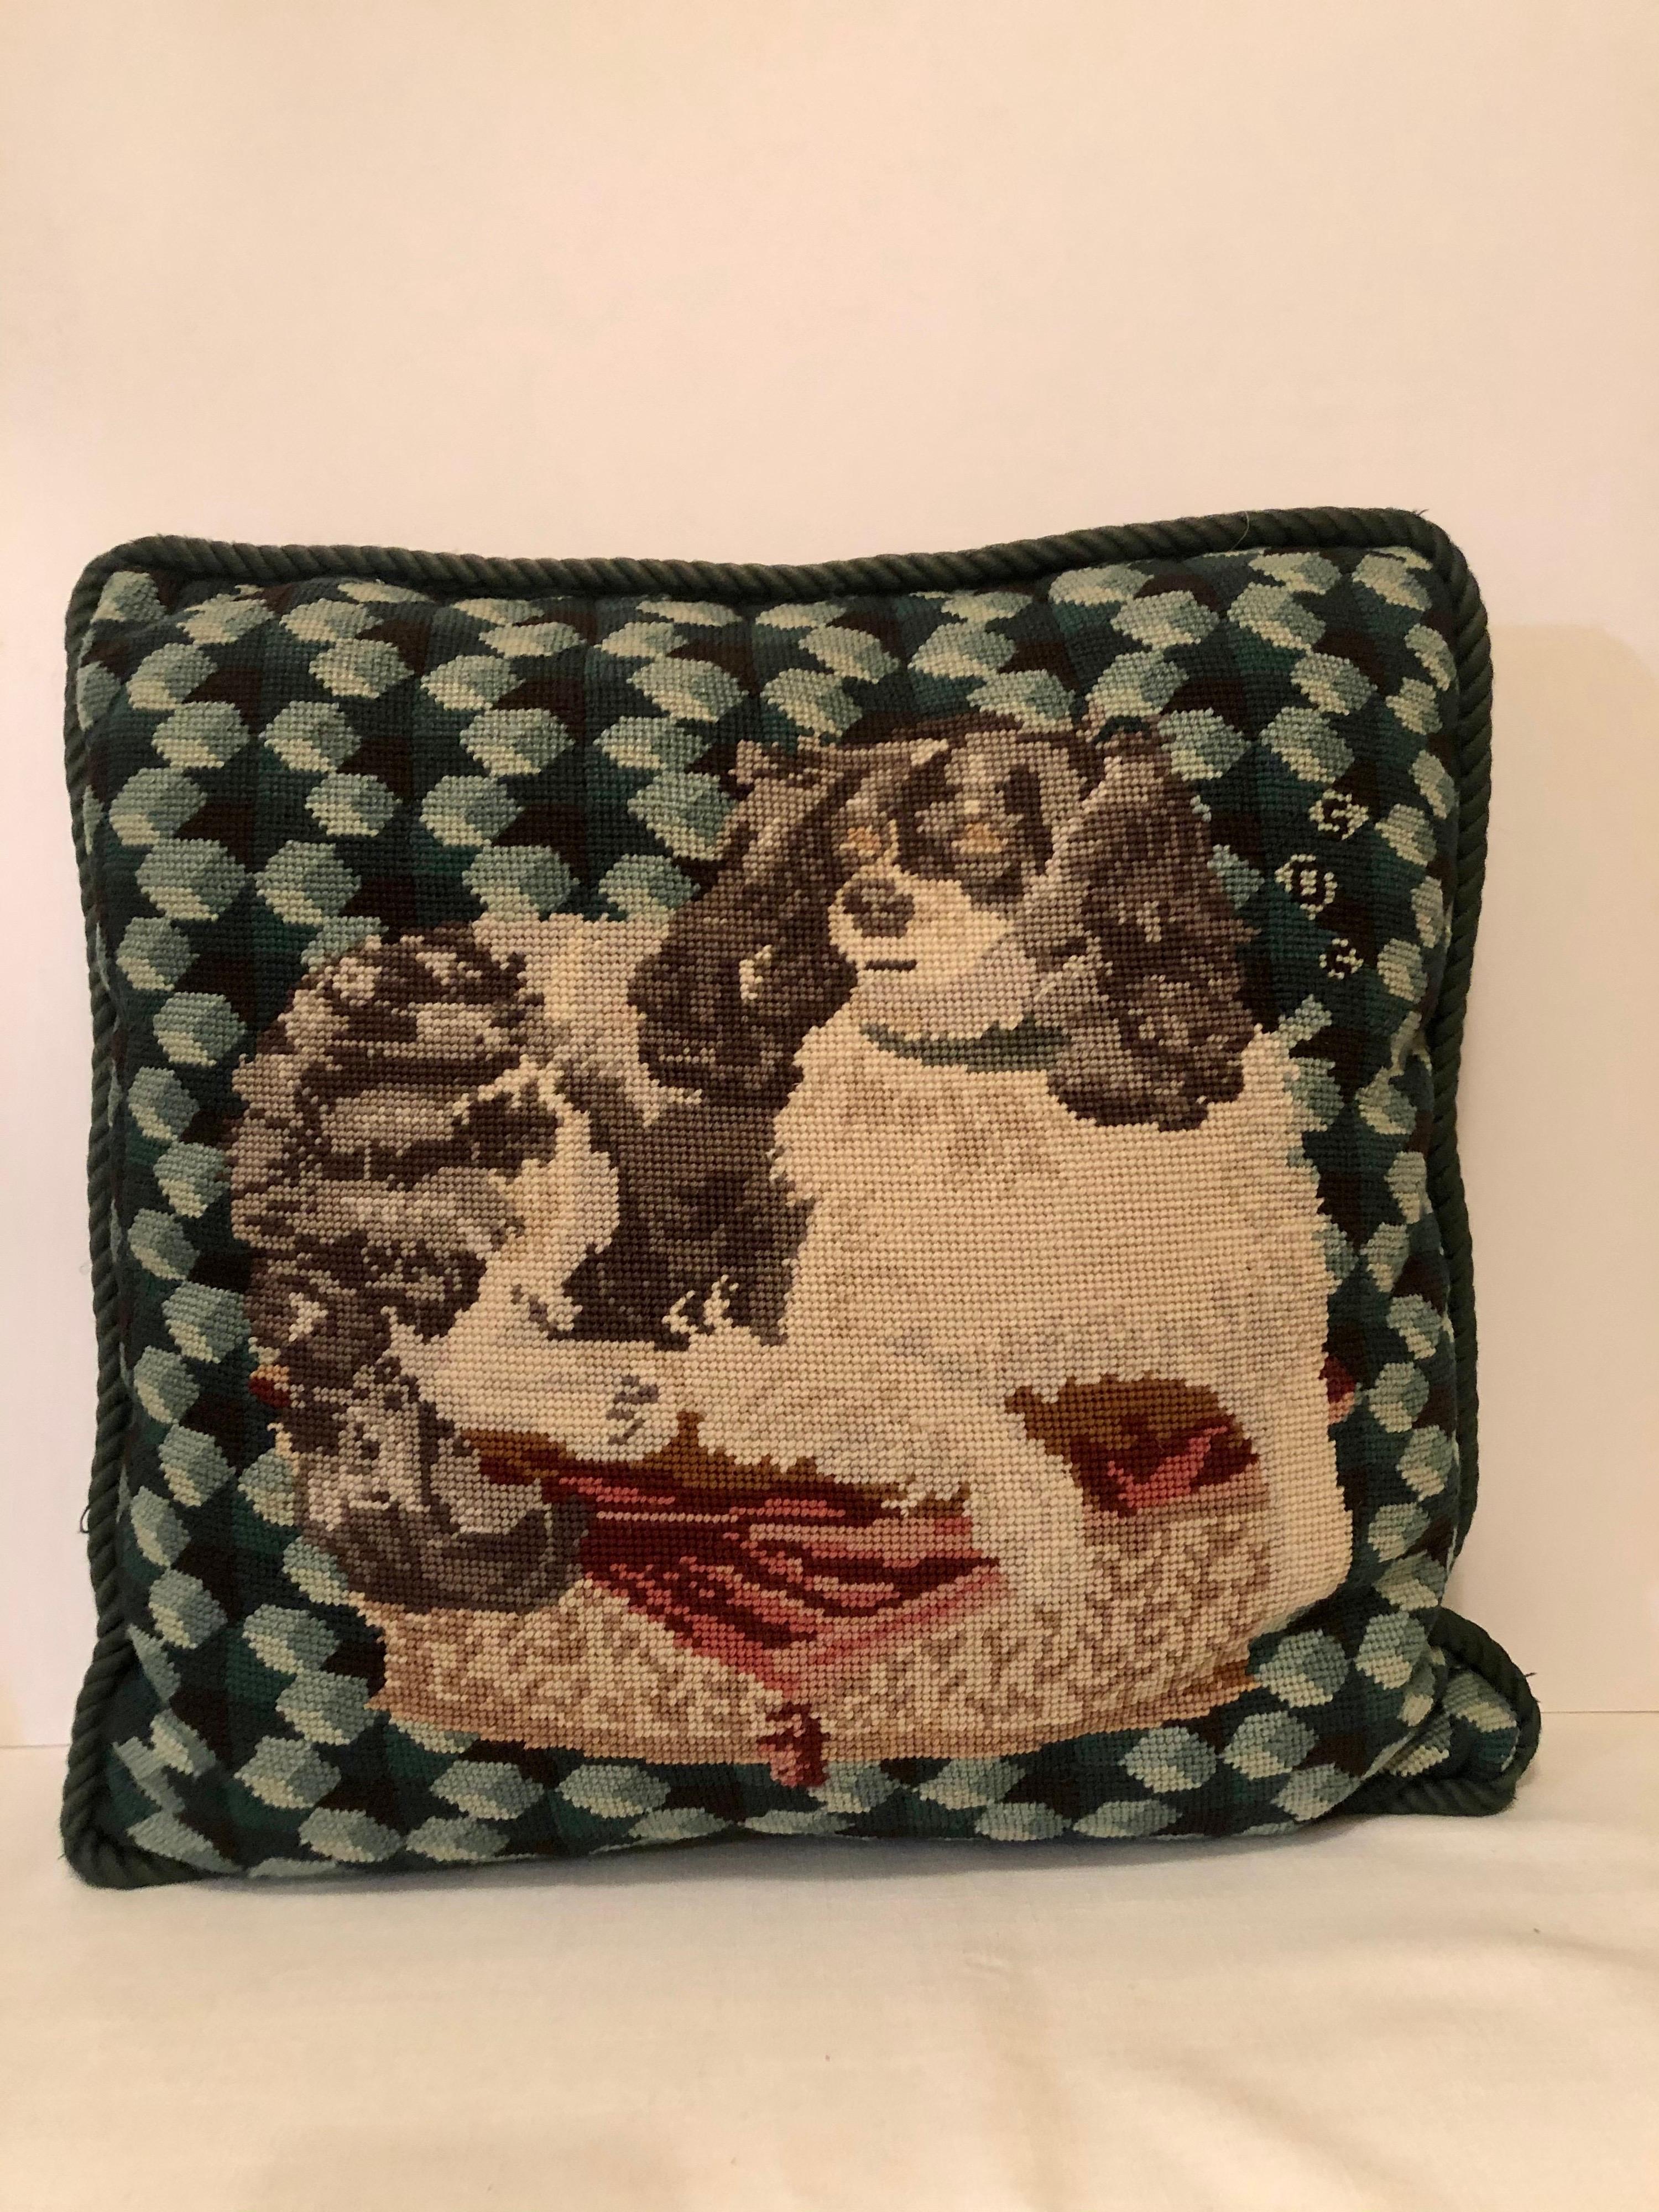 American Enchanting Needlepoint Pillow Decorated with a Cavalier King Charles Spaniel